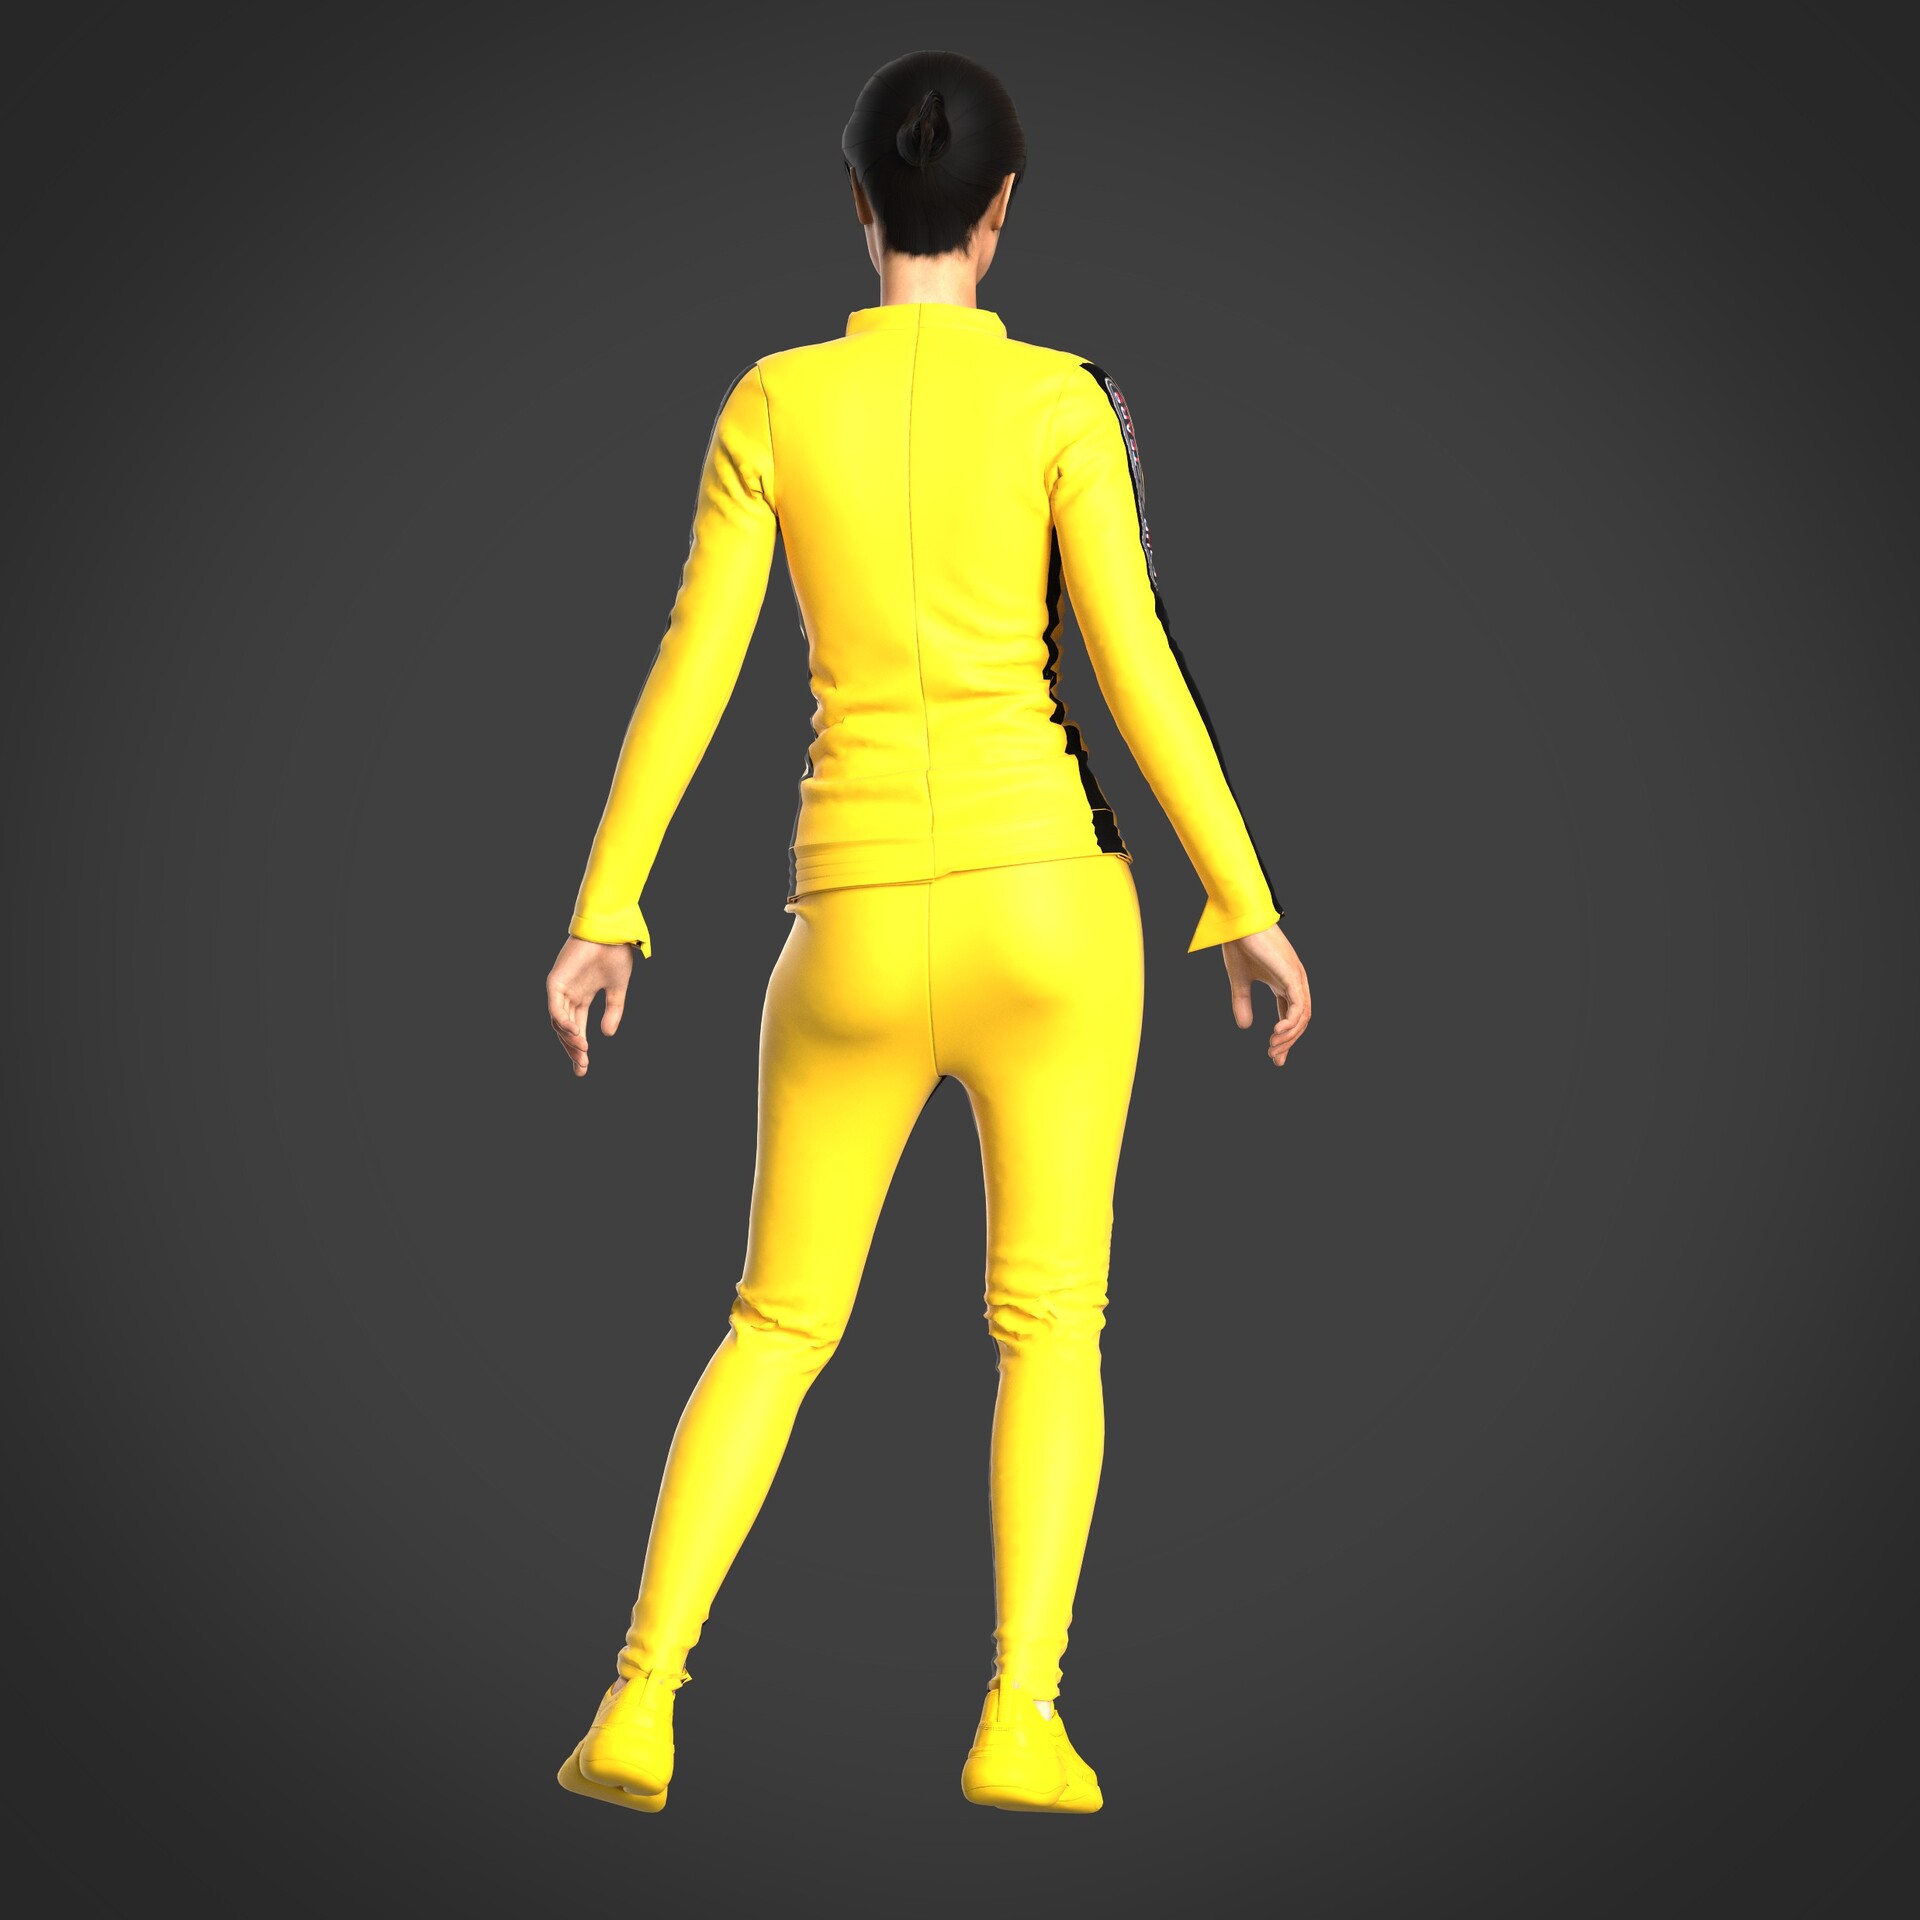 ArtStation - Kill Bill Inspired Outfit made in CLO3D